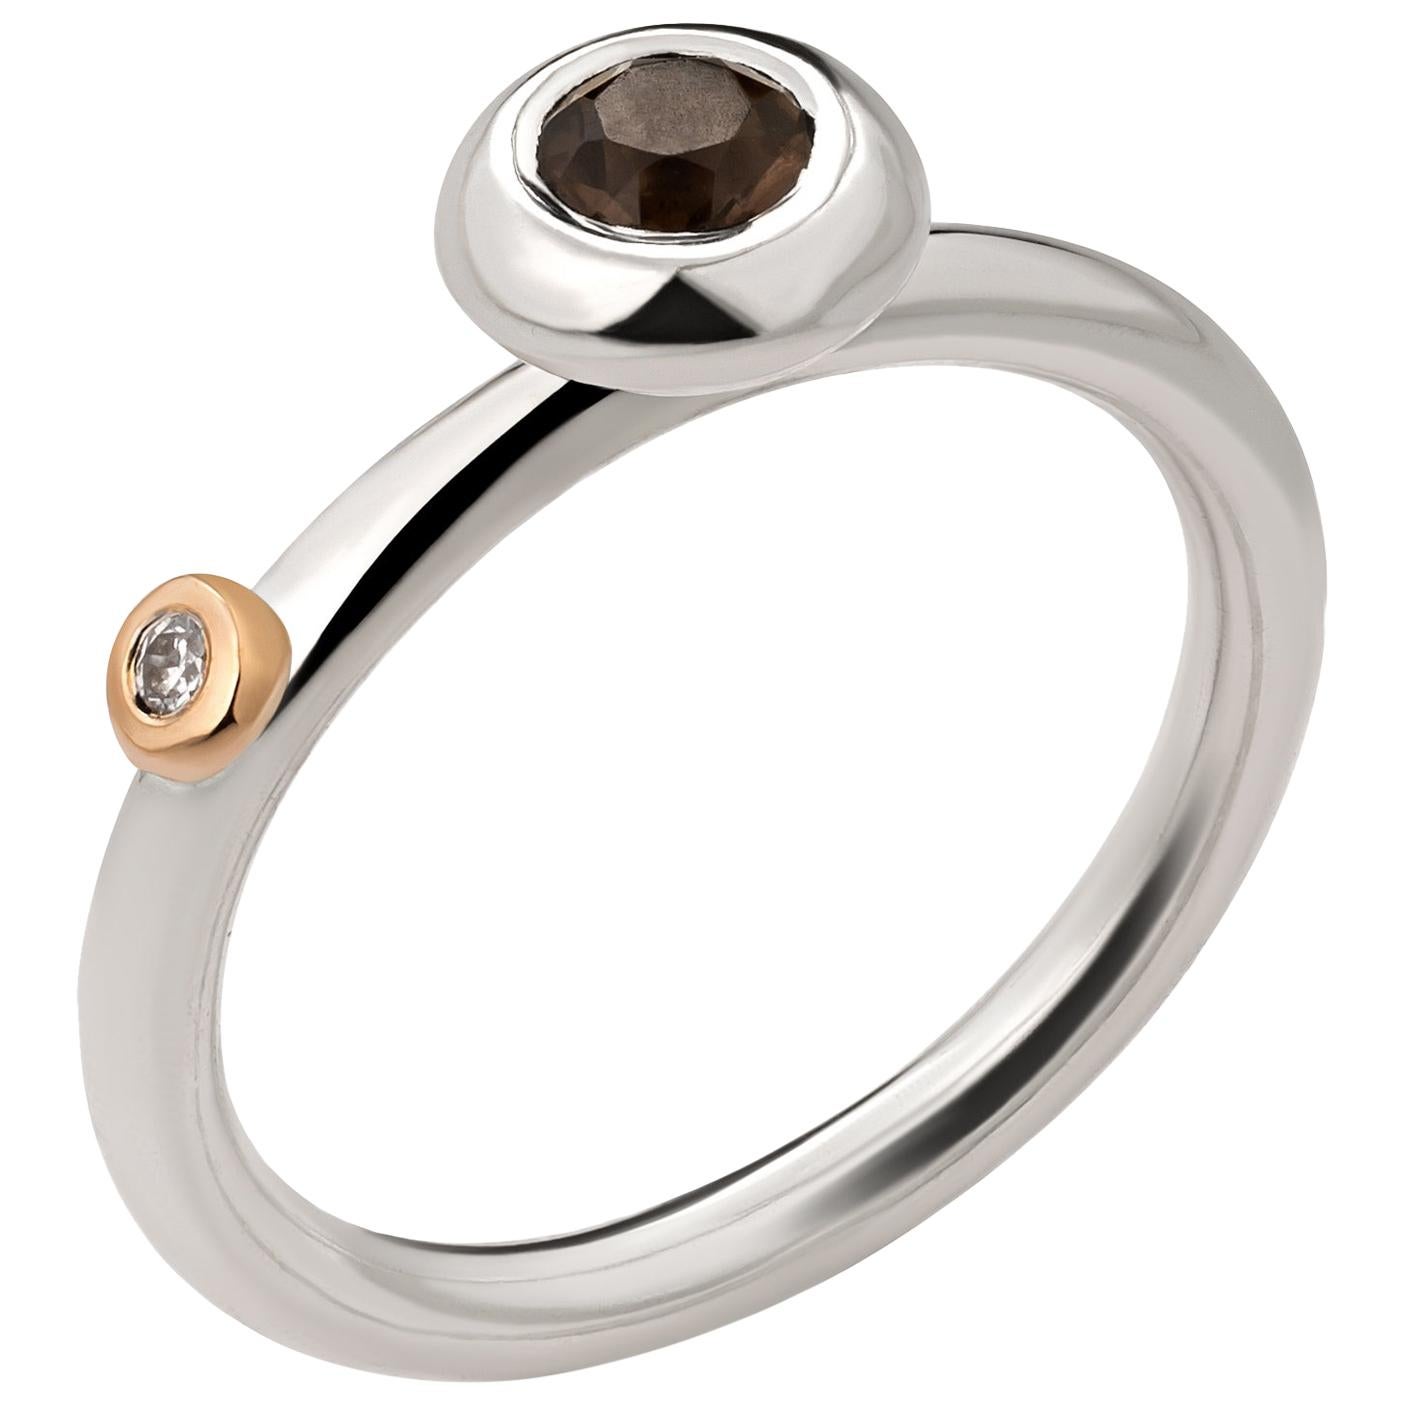 Silver Ring with Smoky Quartz, Zircon and Gold Detail - Ready to Ship For Sale